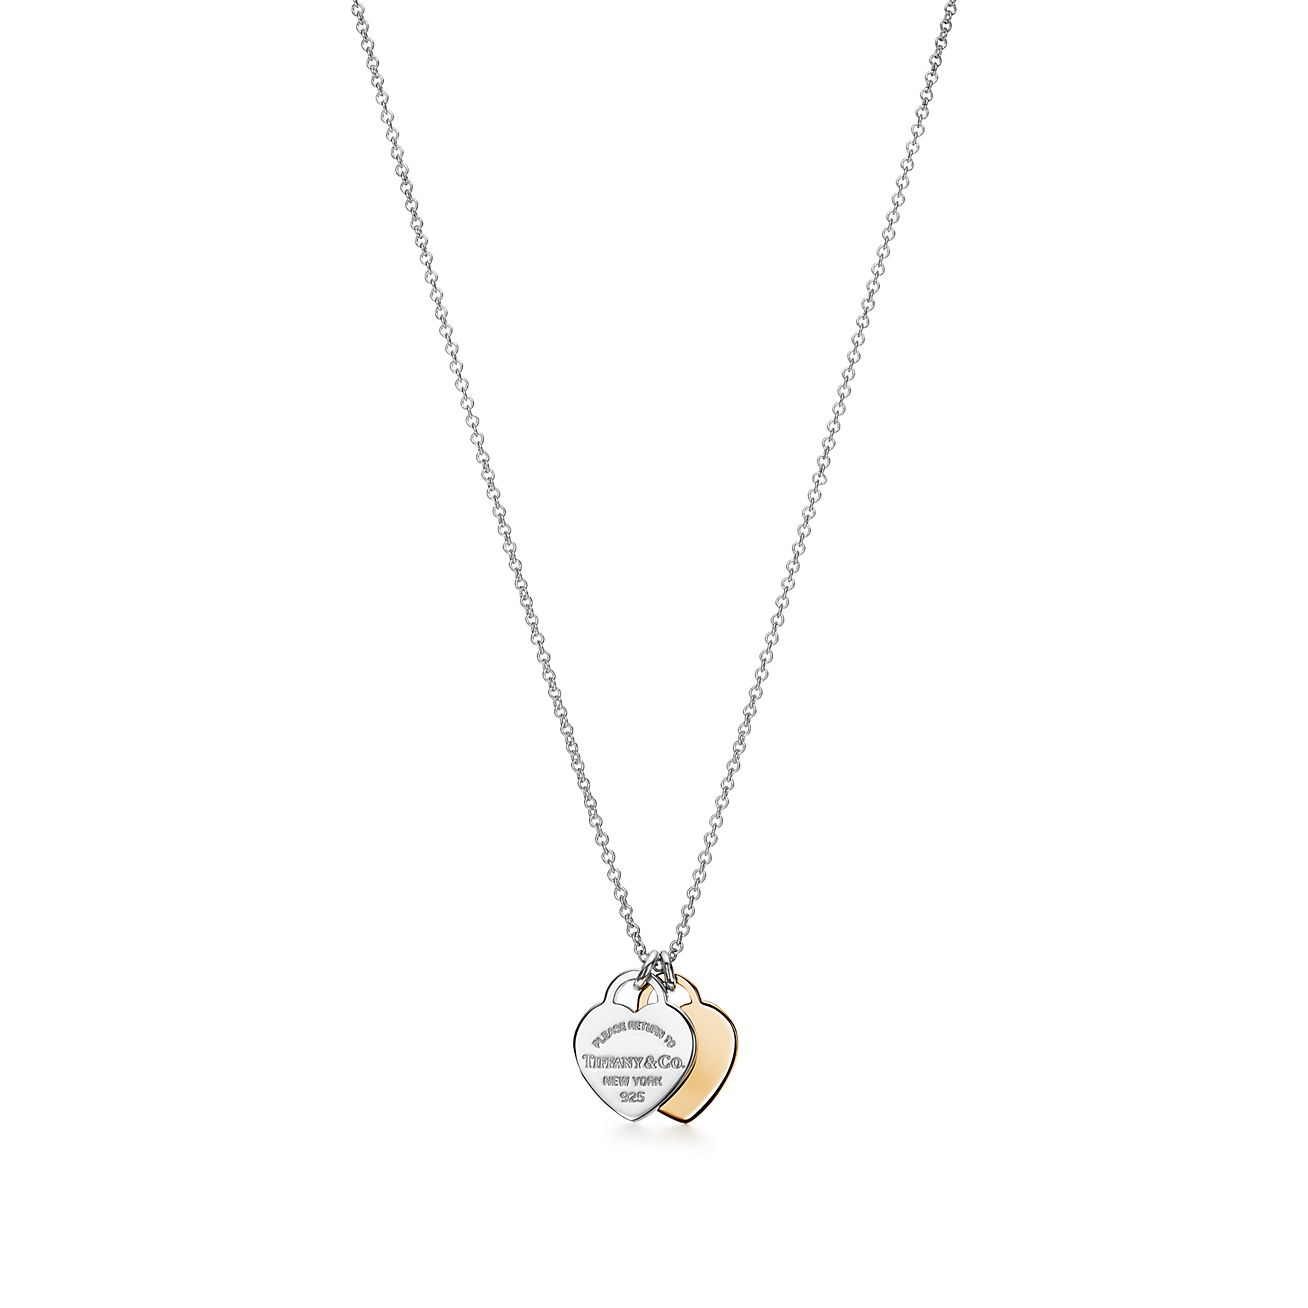 Return to Tiffany™ mini double heart tag pendant in silver and 18k gold. | Tiffany & Co.